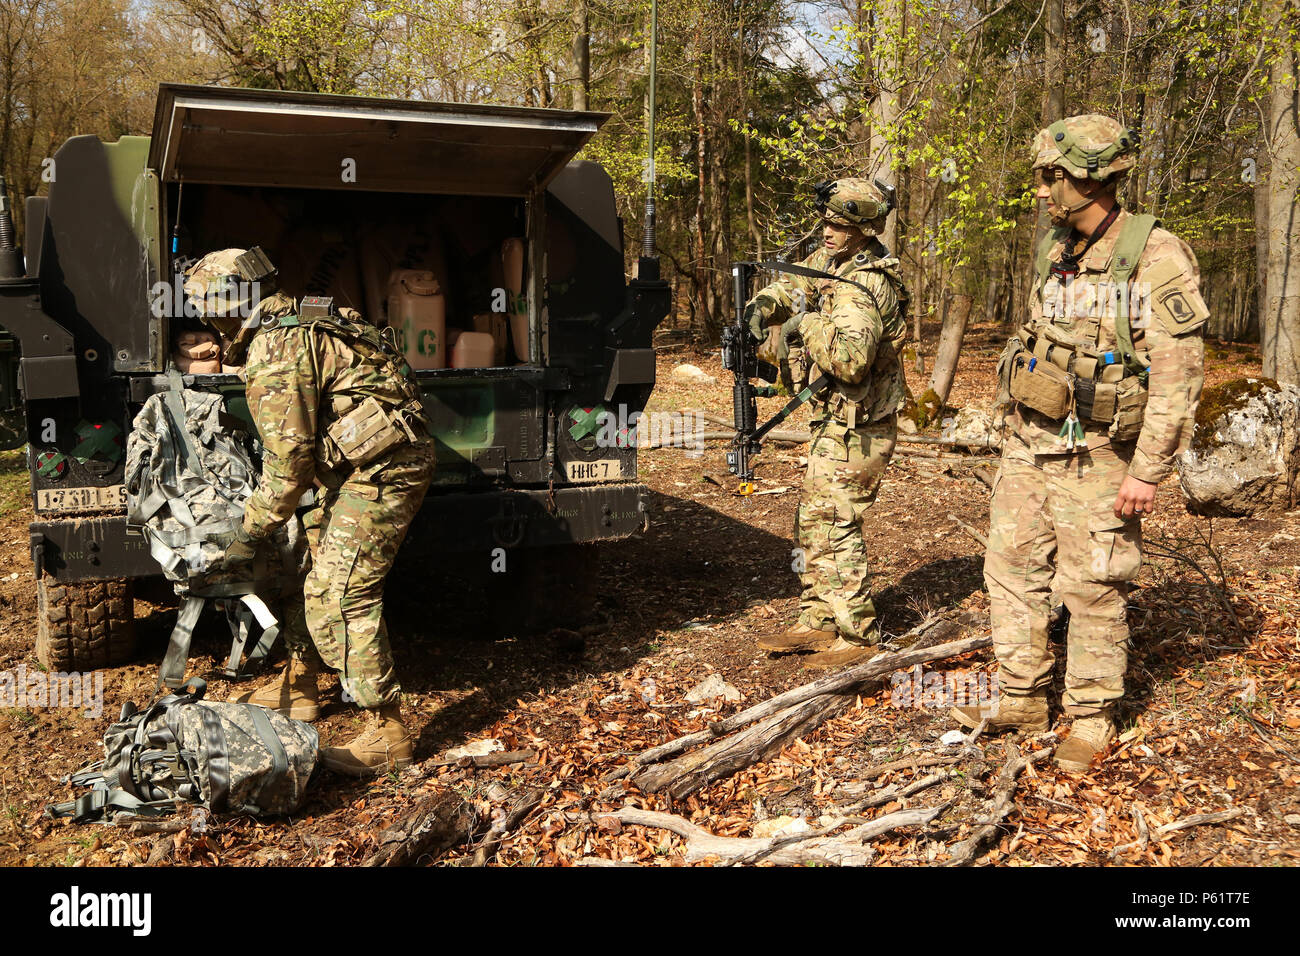 U.S. Soldiers of 1st Battalion, 503rd Infantry Regiment, 173rd Airborne Brigade load up their vehicles with supplies while setting up a scouting position during exercise Saber Junction 16 at the U.S. Army’s Joint Multinational Readiness Center (JMRC) in Hohenfels, Germany, April 14, 2016. Saber Junction 16 is the U.S. Army Europe’s 173rd Airborne Brigade’s combat training center certification exercise, taking place at the JMRC in Hohenfels, Germany, Mar. 31-Apr. 24, 2016.  The exercise is designed to evaluate the readiness of the Army’s Europe-based combat brigades to conduct unified land oper Stock Photo